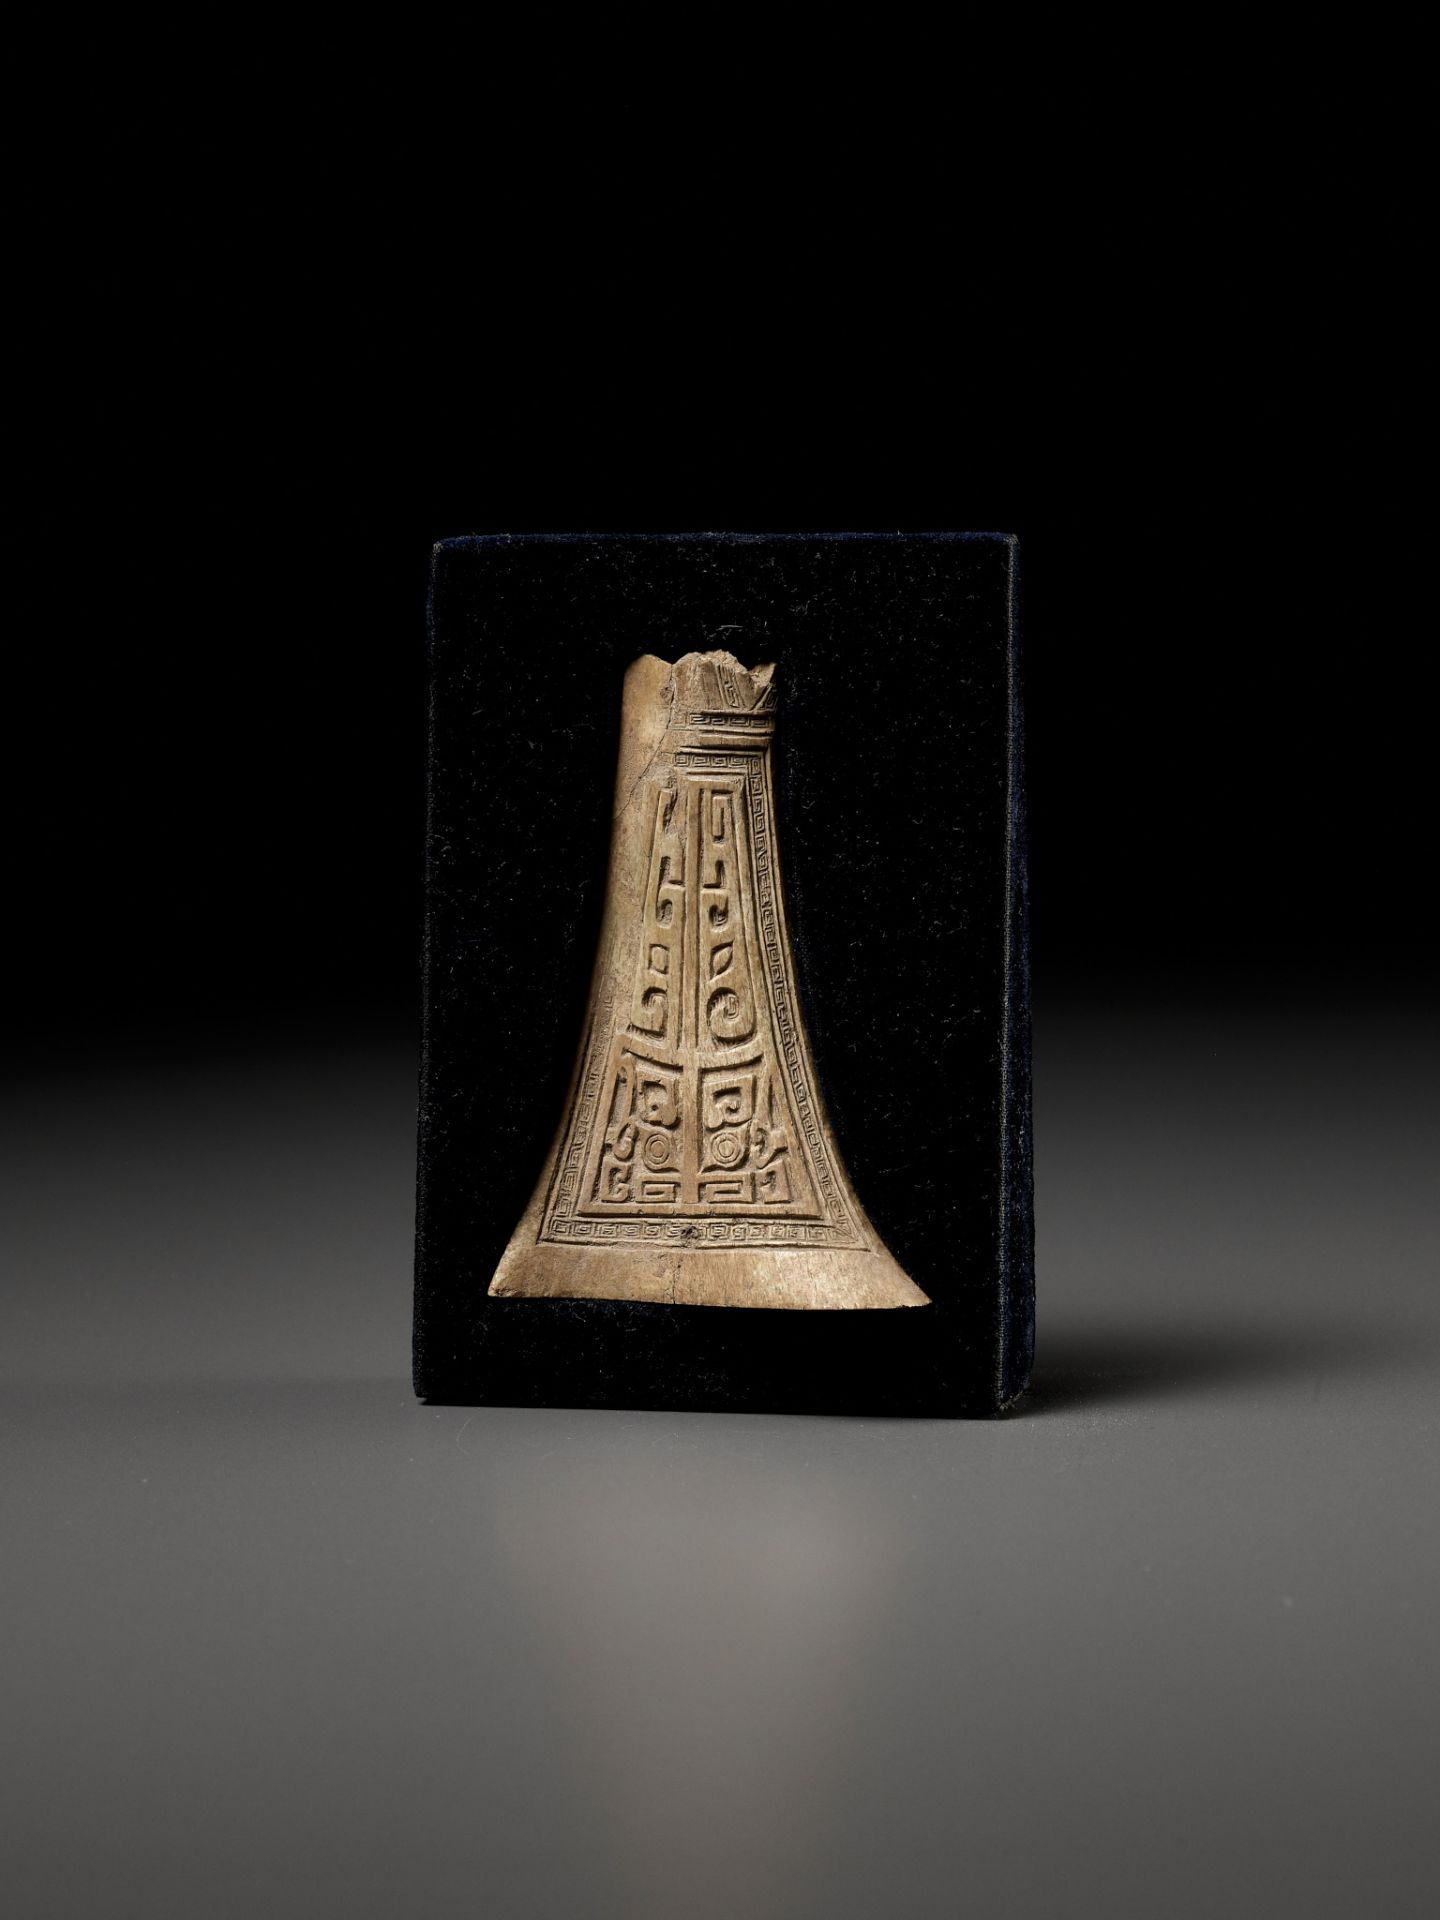 AN ARCHAIC CEREMONIAL BONE CARVING, SHANG DYNASTY - Image 11 of 17